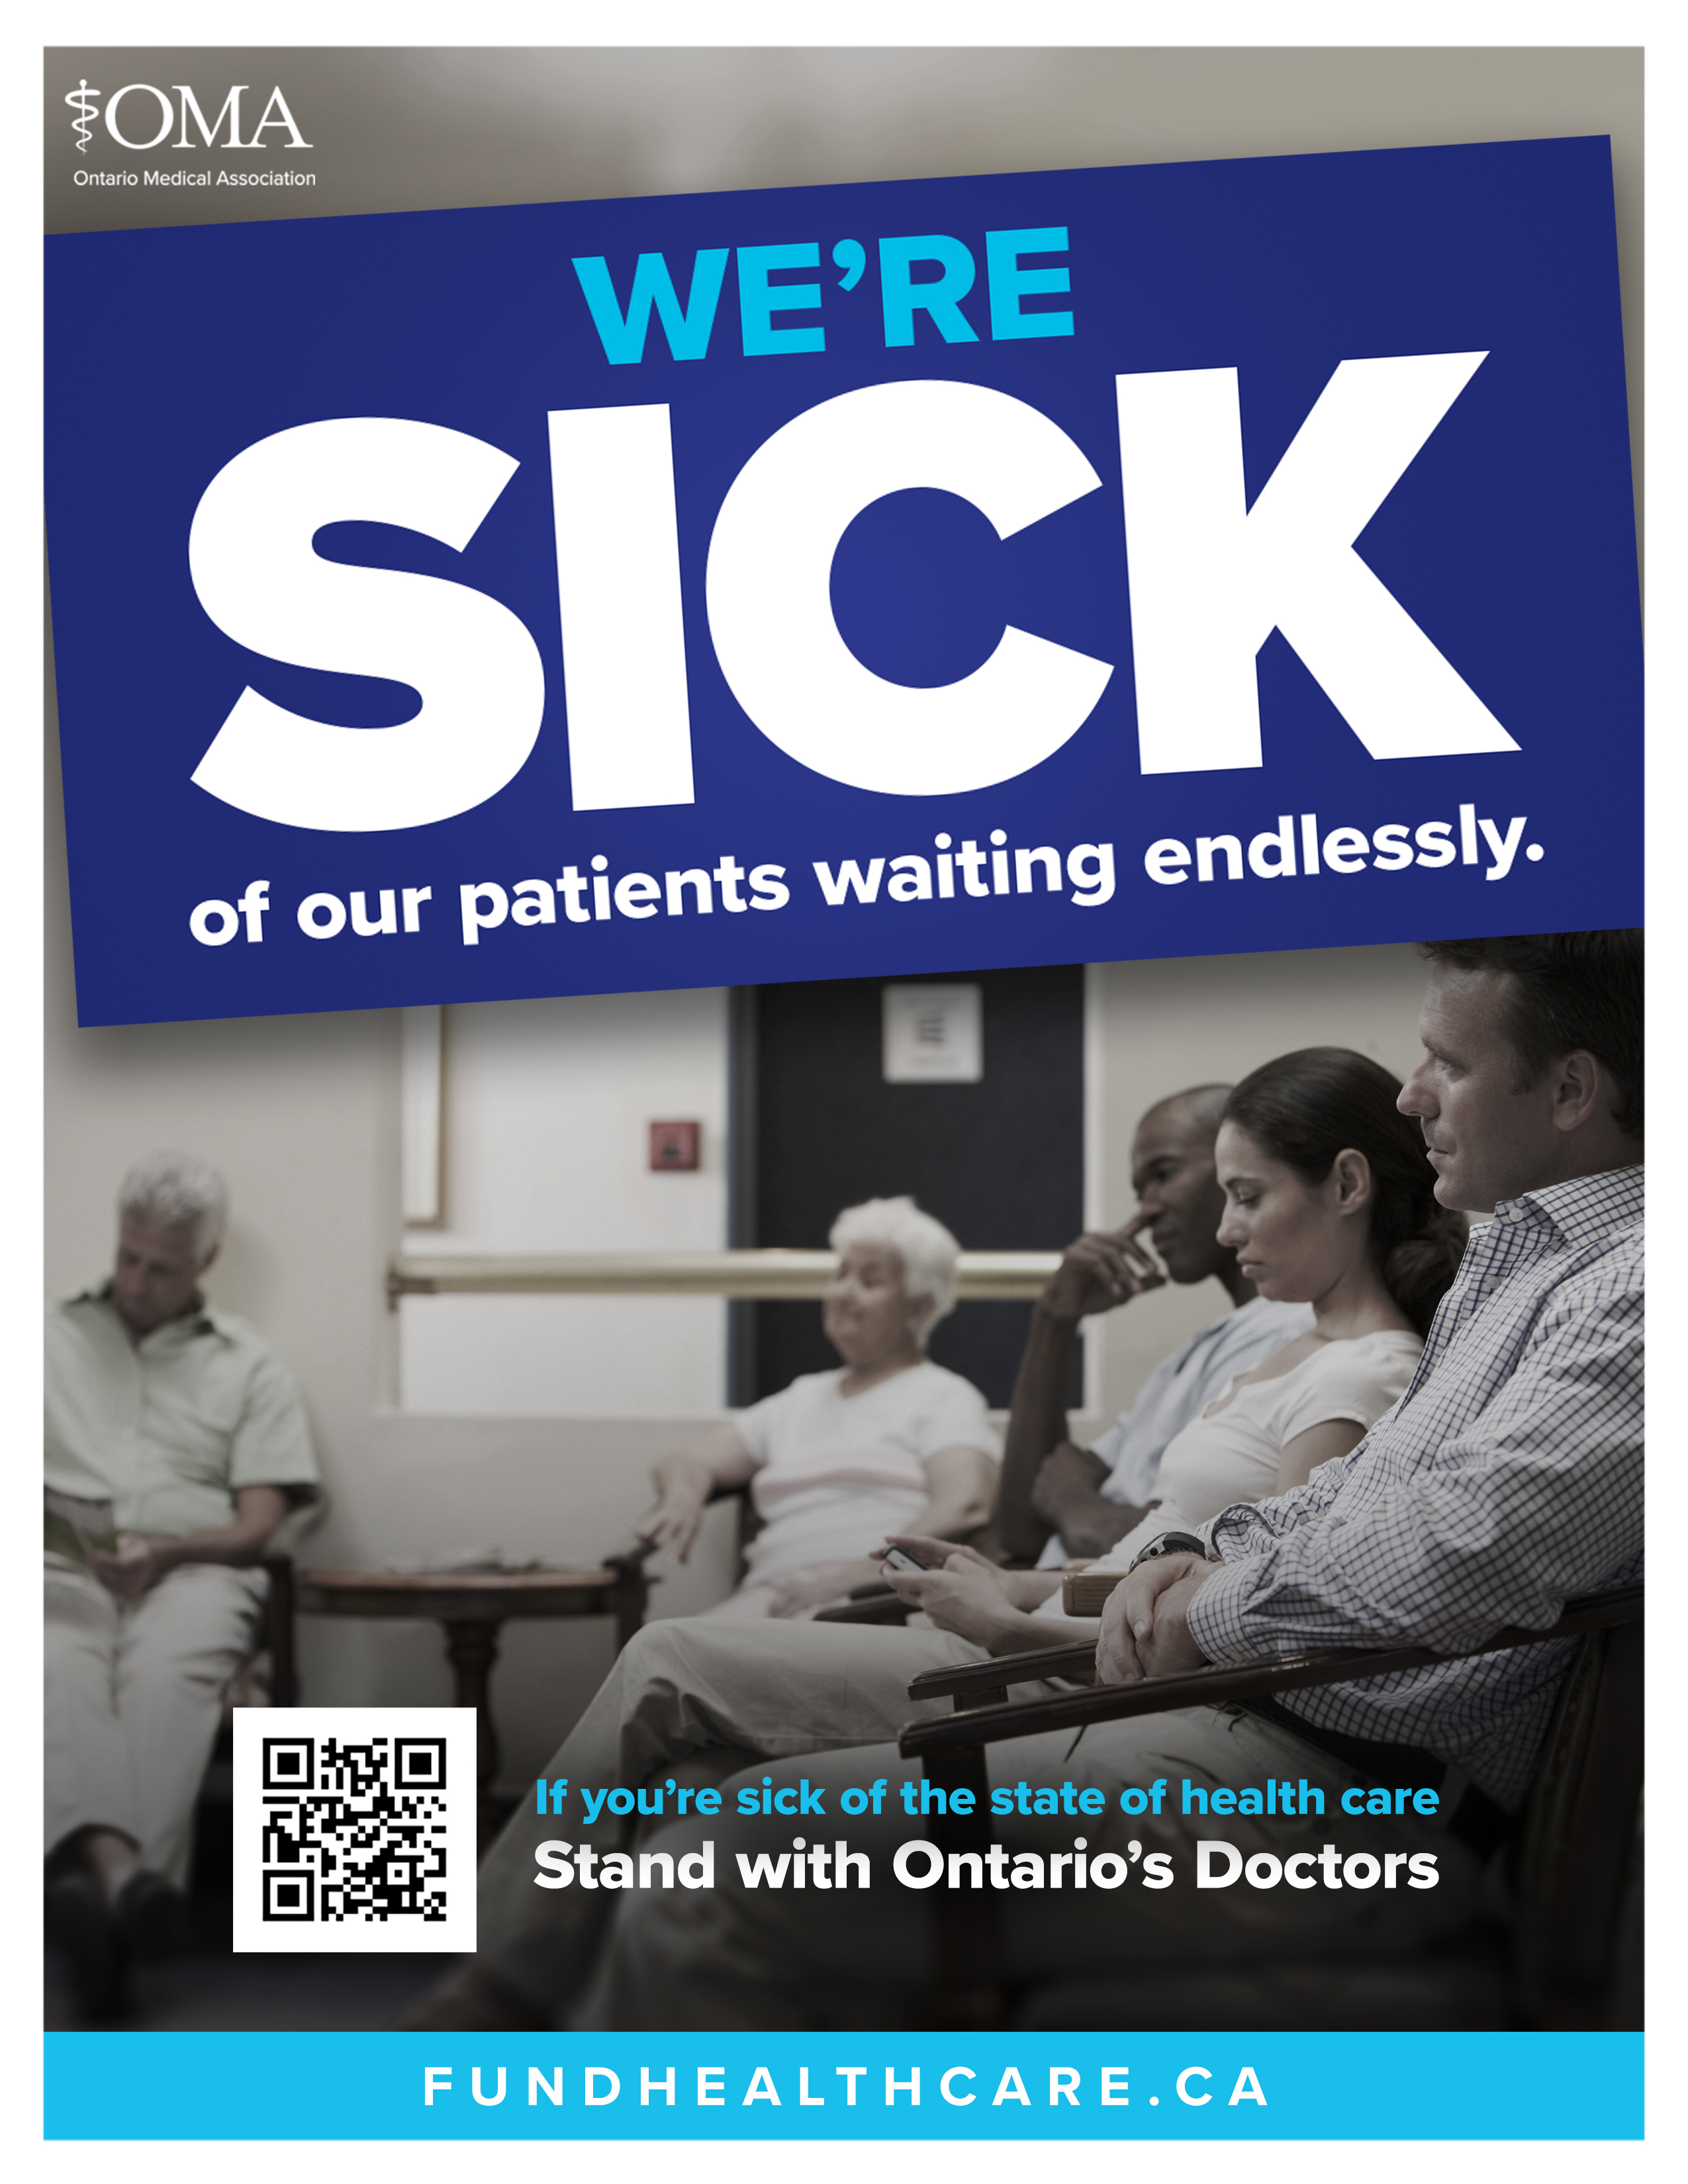 We're sick of patients waiting endlessly poster